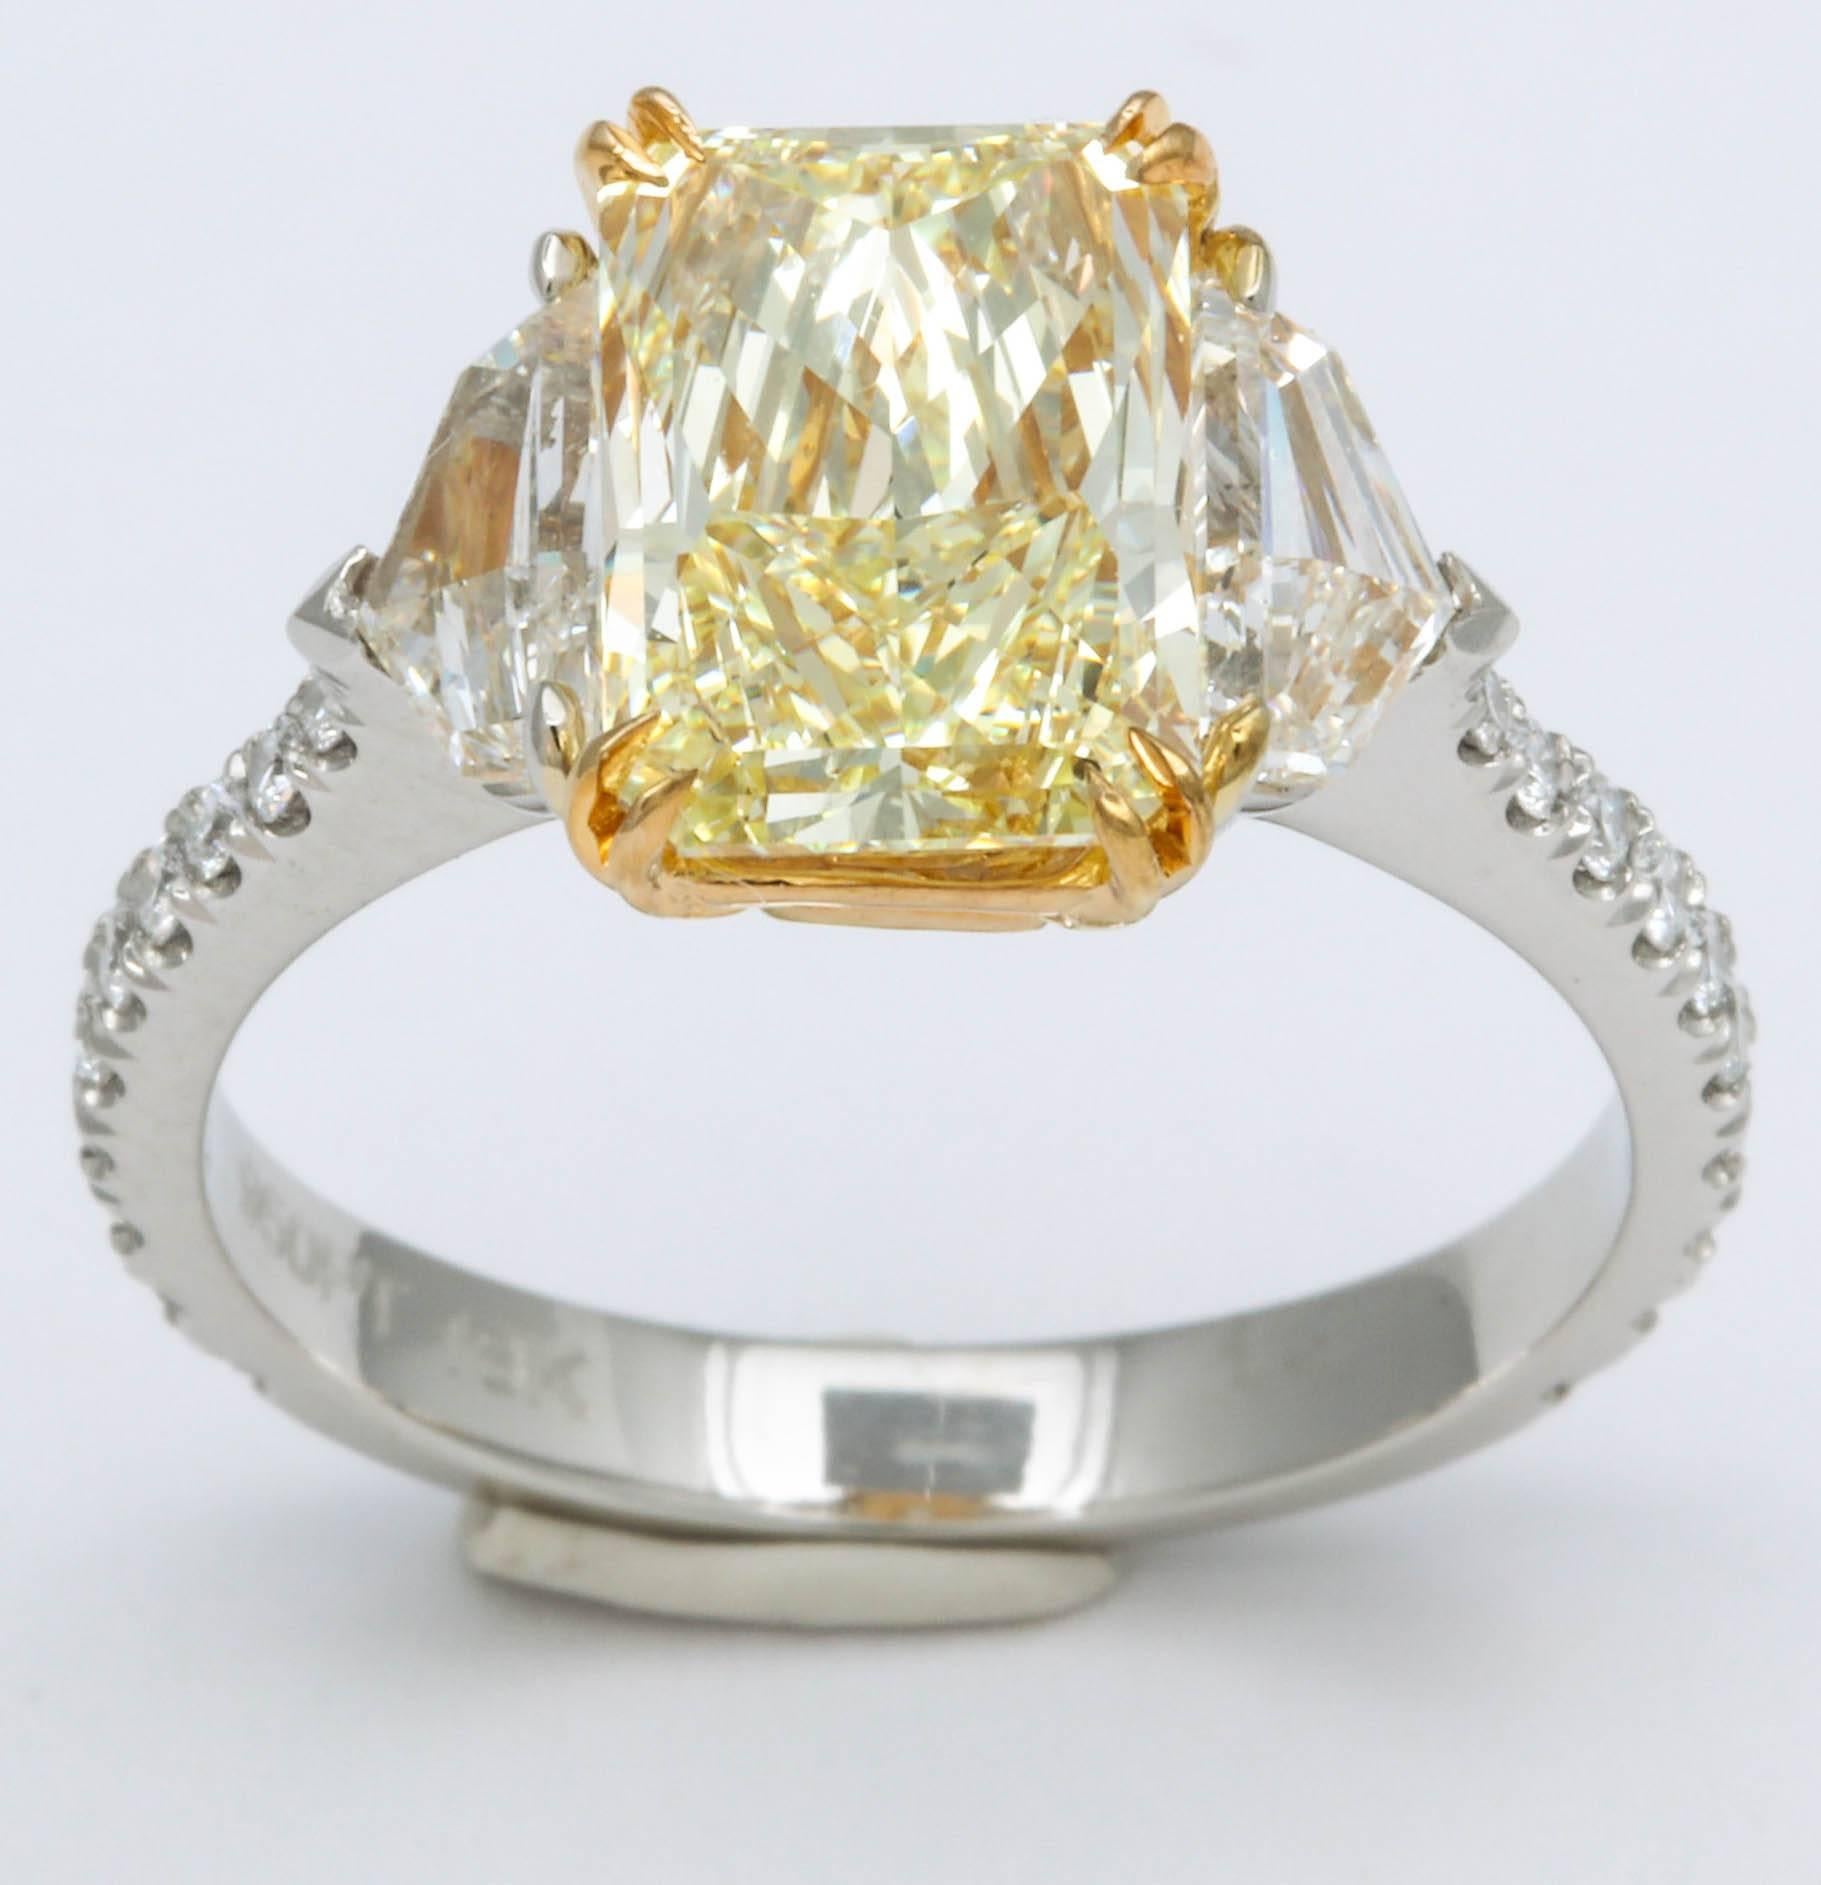 
A beautiful yellow diamond set in a unique custom mounting. 

2.34 carat Fancy Yellow radiant cut center diamond -- the diamond has a spectacular cut to maximize brilliance and size,  it looks like a 3 carat stone!!

The stone is VS1 clarity,